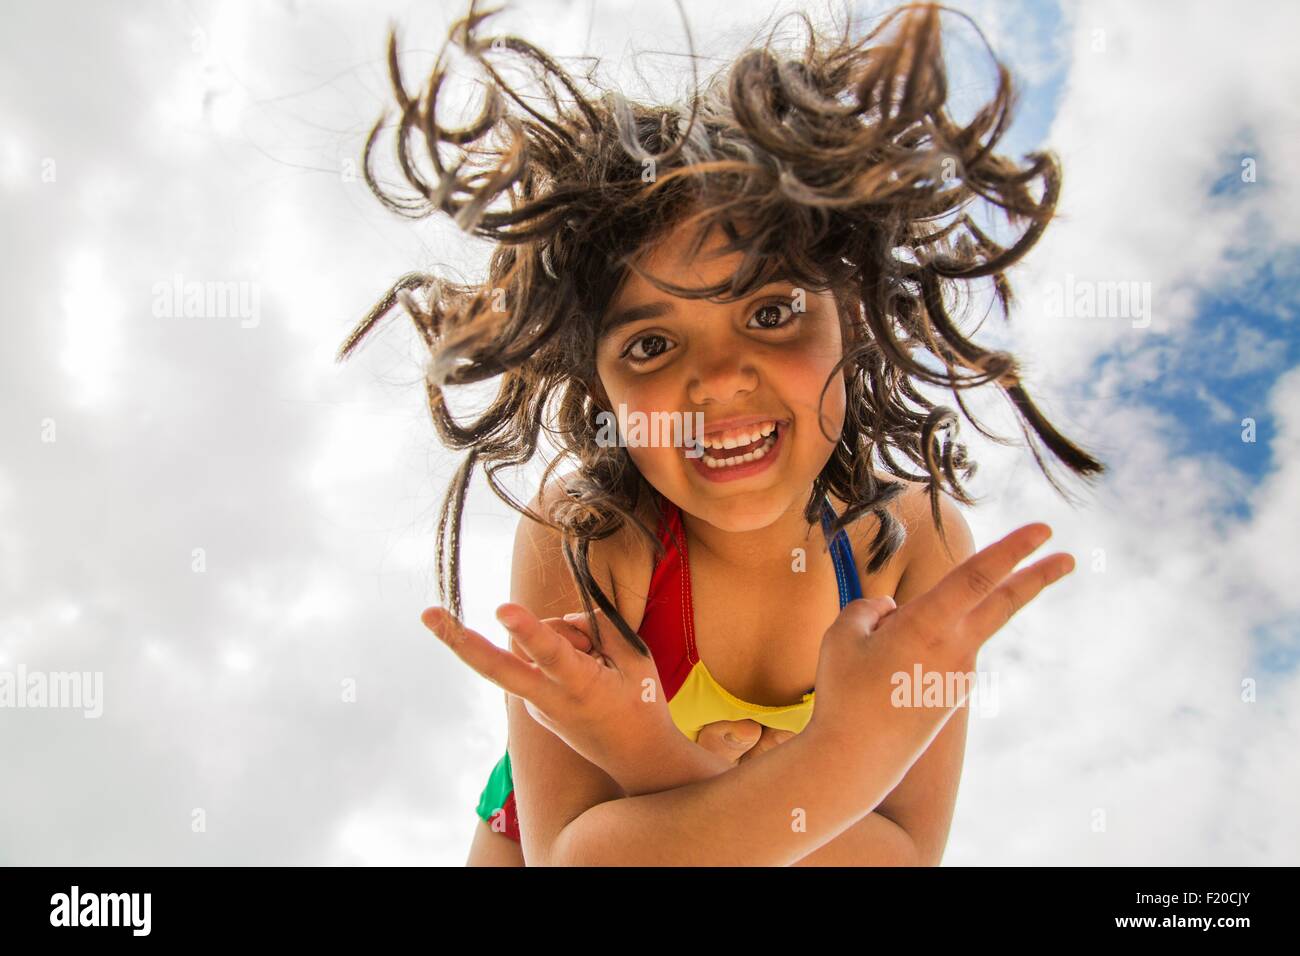 Low angle portrait of girl with long curly hair balancing on top of someones foot Stock Photo